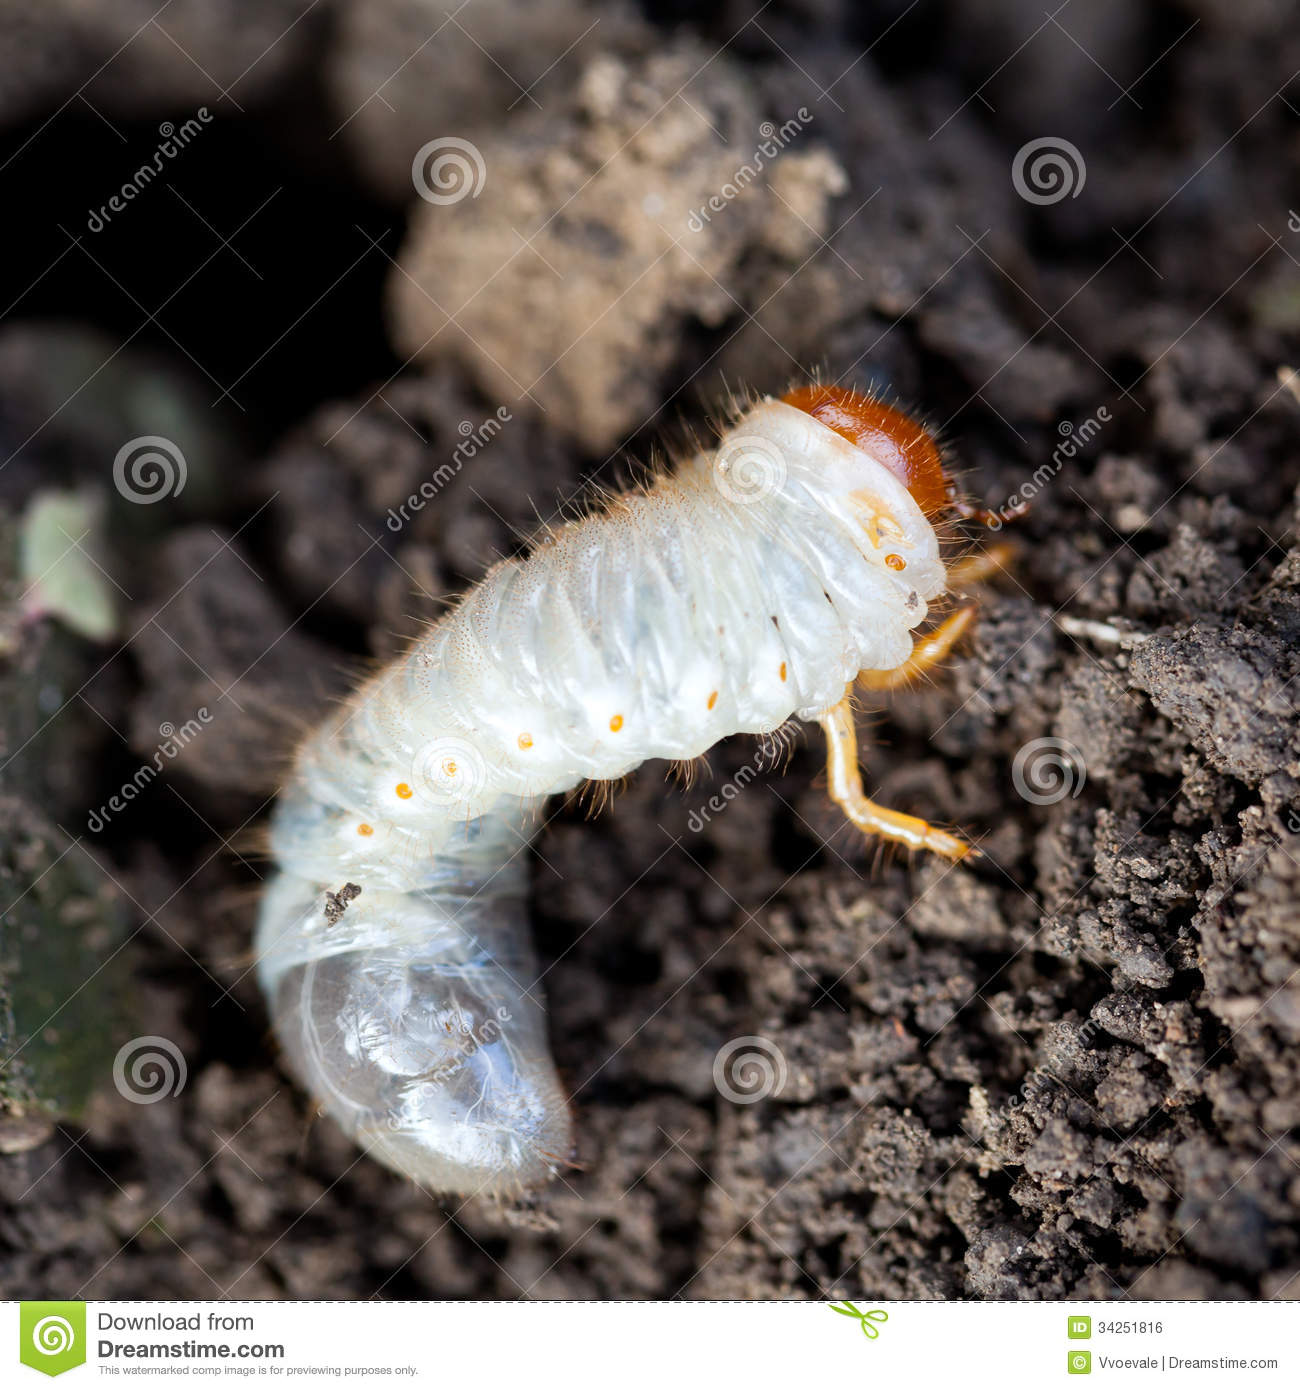 Cockchafer Grub Stock Photos, Images, & Pictures.